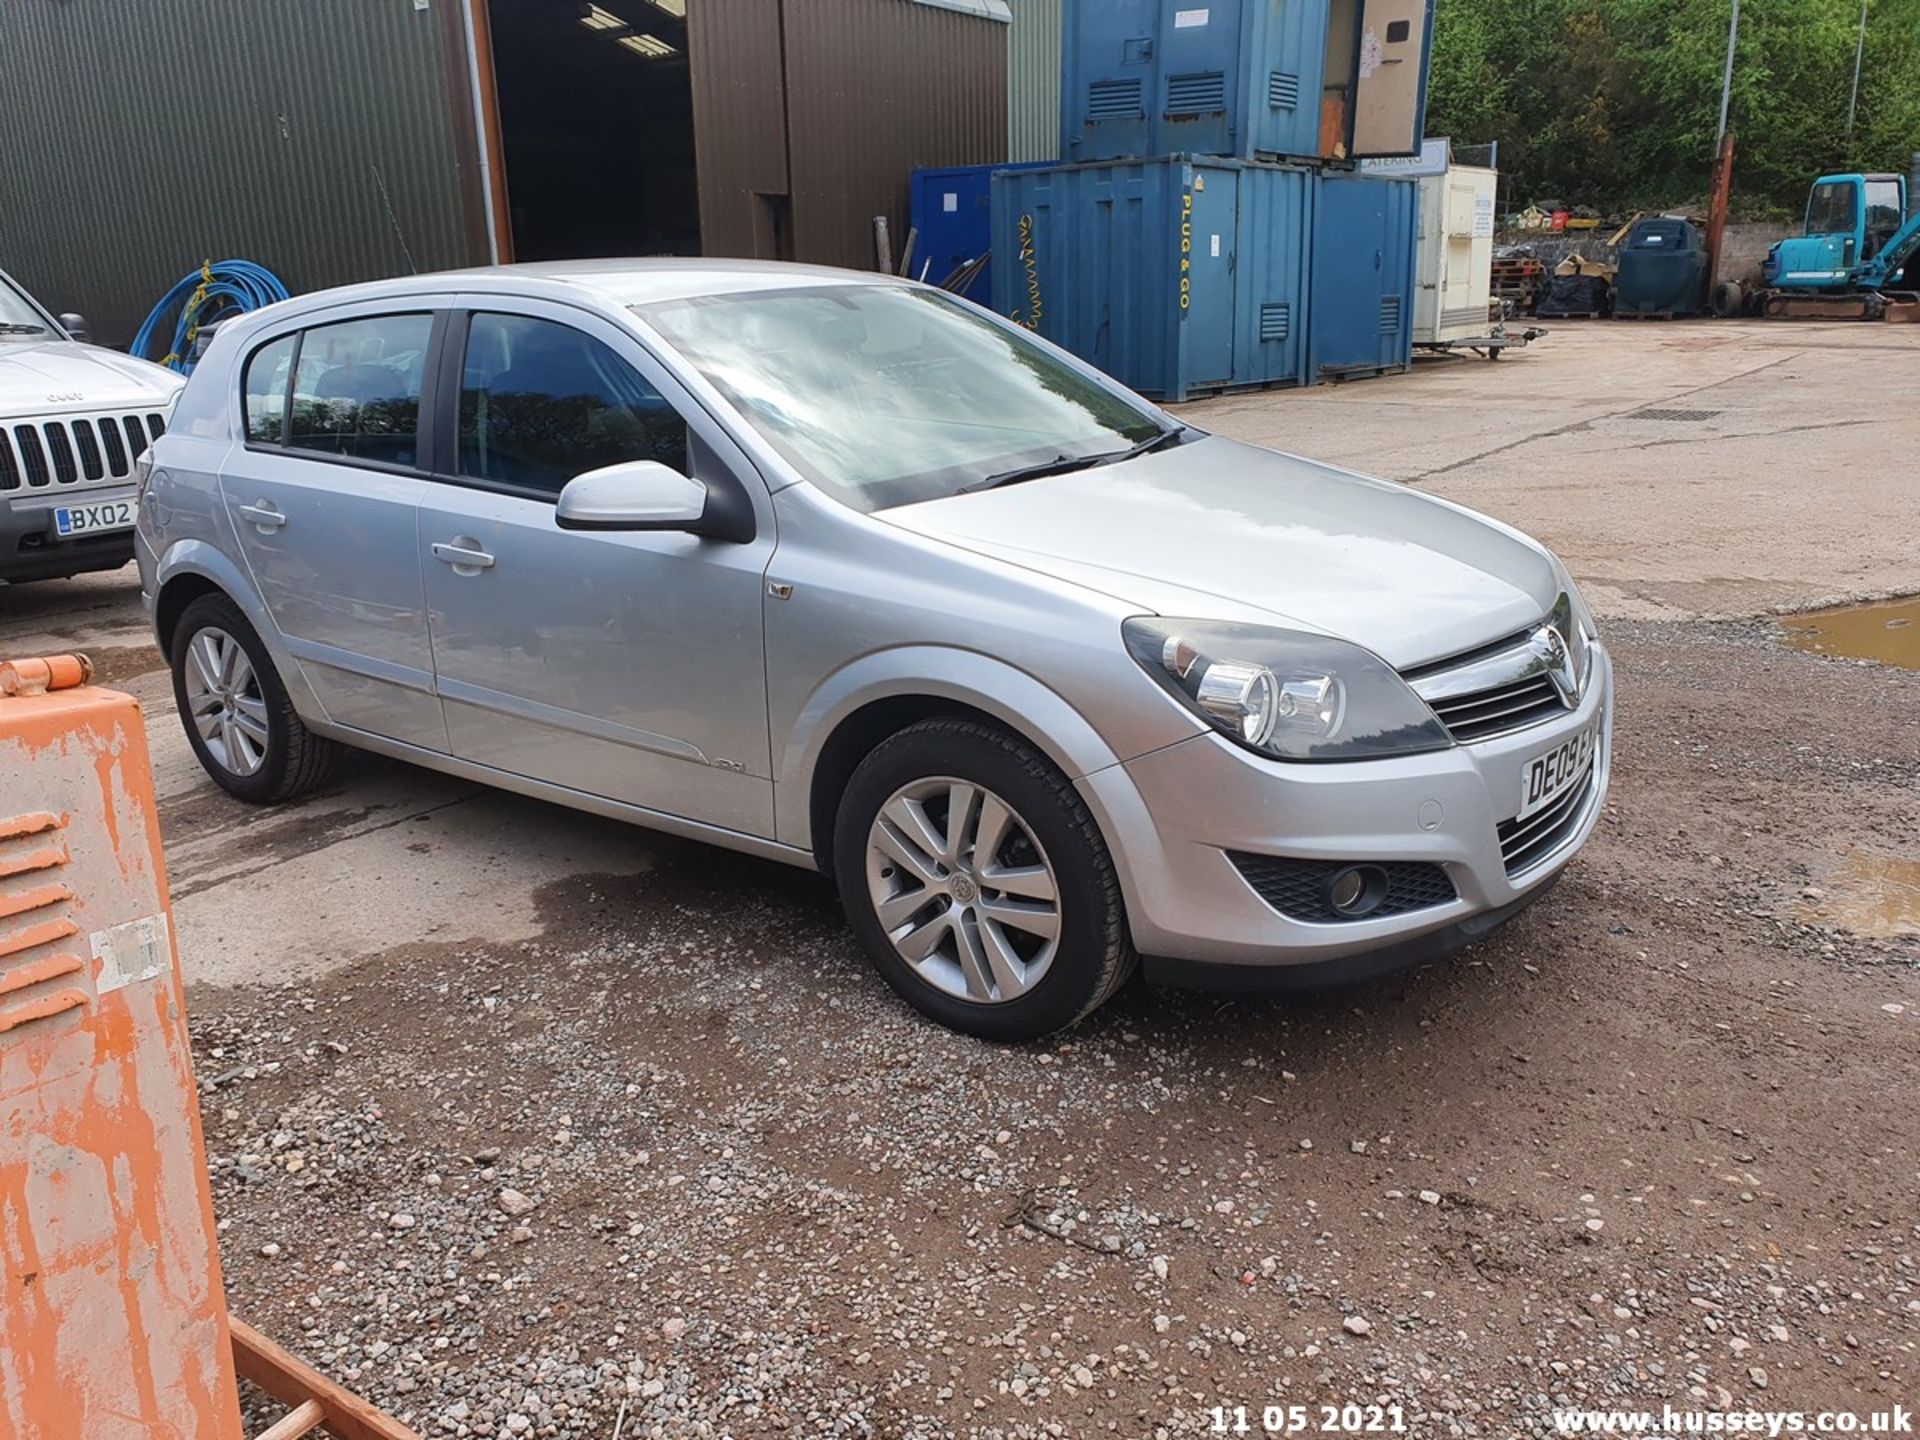 09/09 VAUXHALL ASTRA SXI TWINPORT - 1364cc 5dr Hatchback (Silver, 101k) - Image 7 of 13